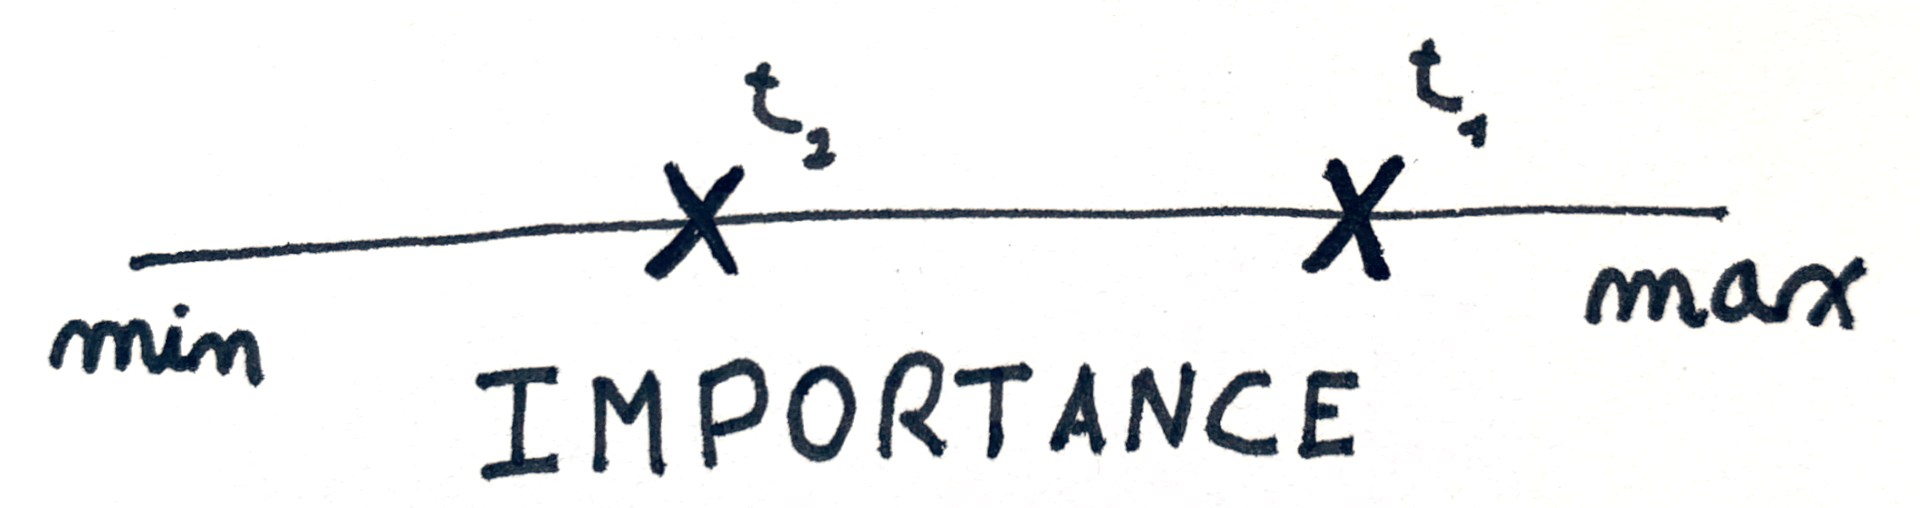 Sketch of an horizontal line with the word "importance" below. On the extremes two labels: "min" and "max". Two "x"s represent the tasks mentioned above placed on their average value.